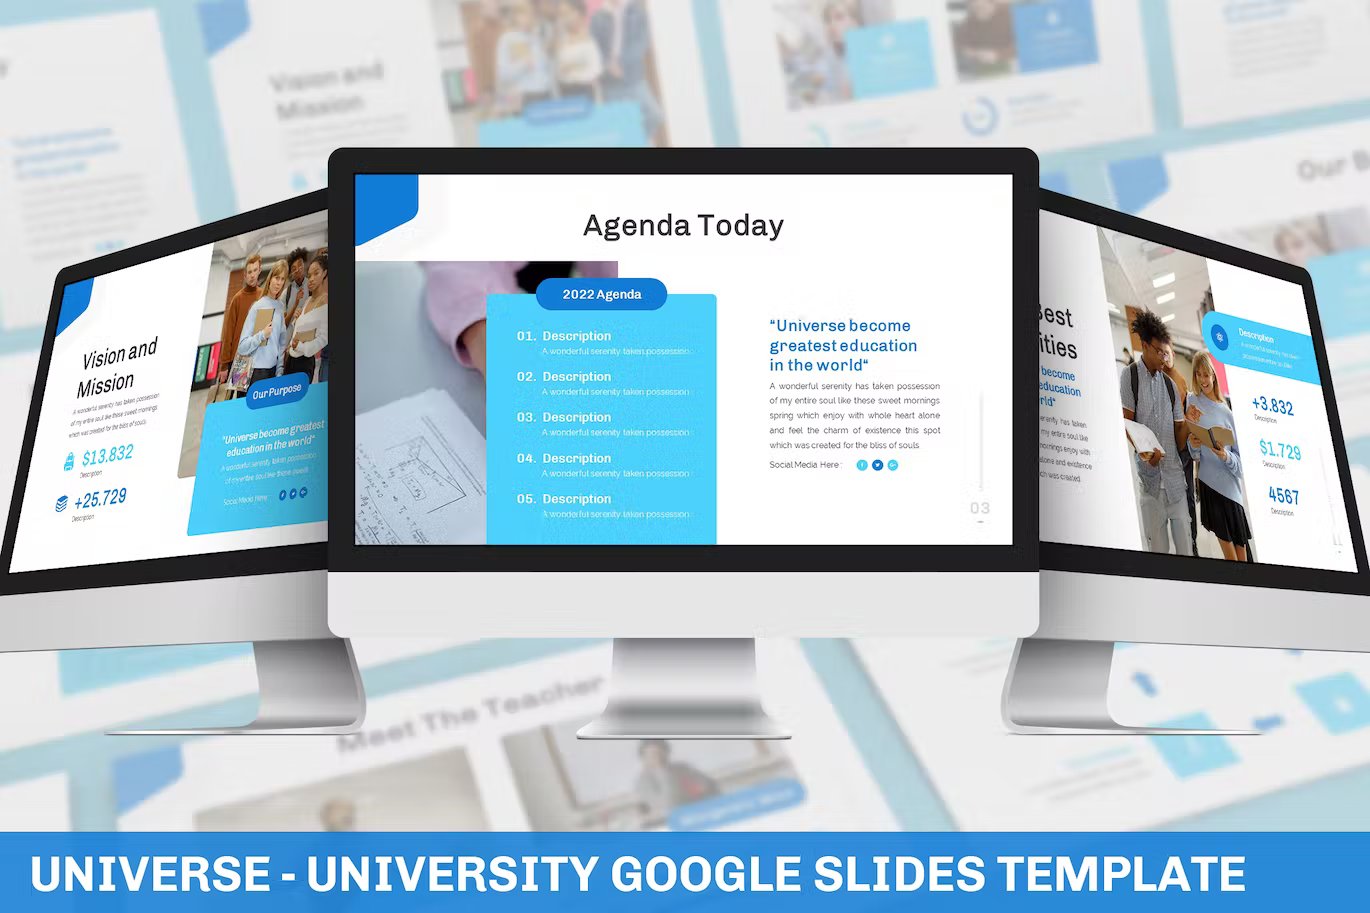 White lettering "Universe - University Google Slides Template" on a blue background and 3 mockups IMac with different universe university google slide templates in blue, white, light blue and black.